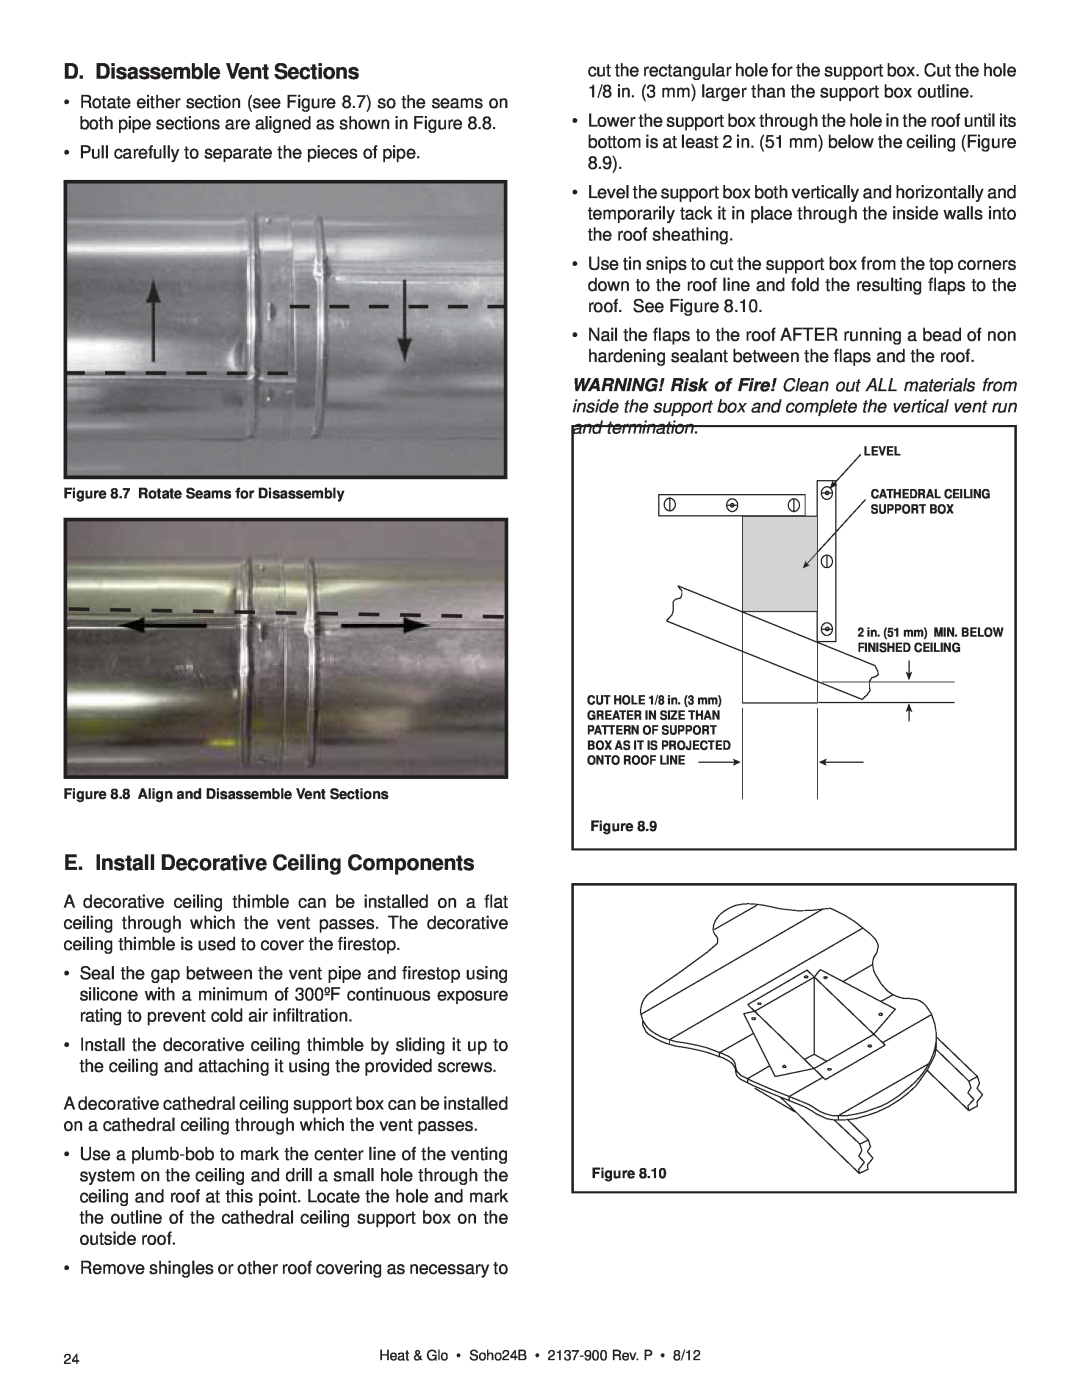 Heat & Glo LifeStyle 2137-900 owner manual D. Disassemble Vent Sections, E. Install Decorative Ceiling Components 